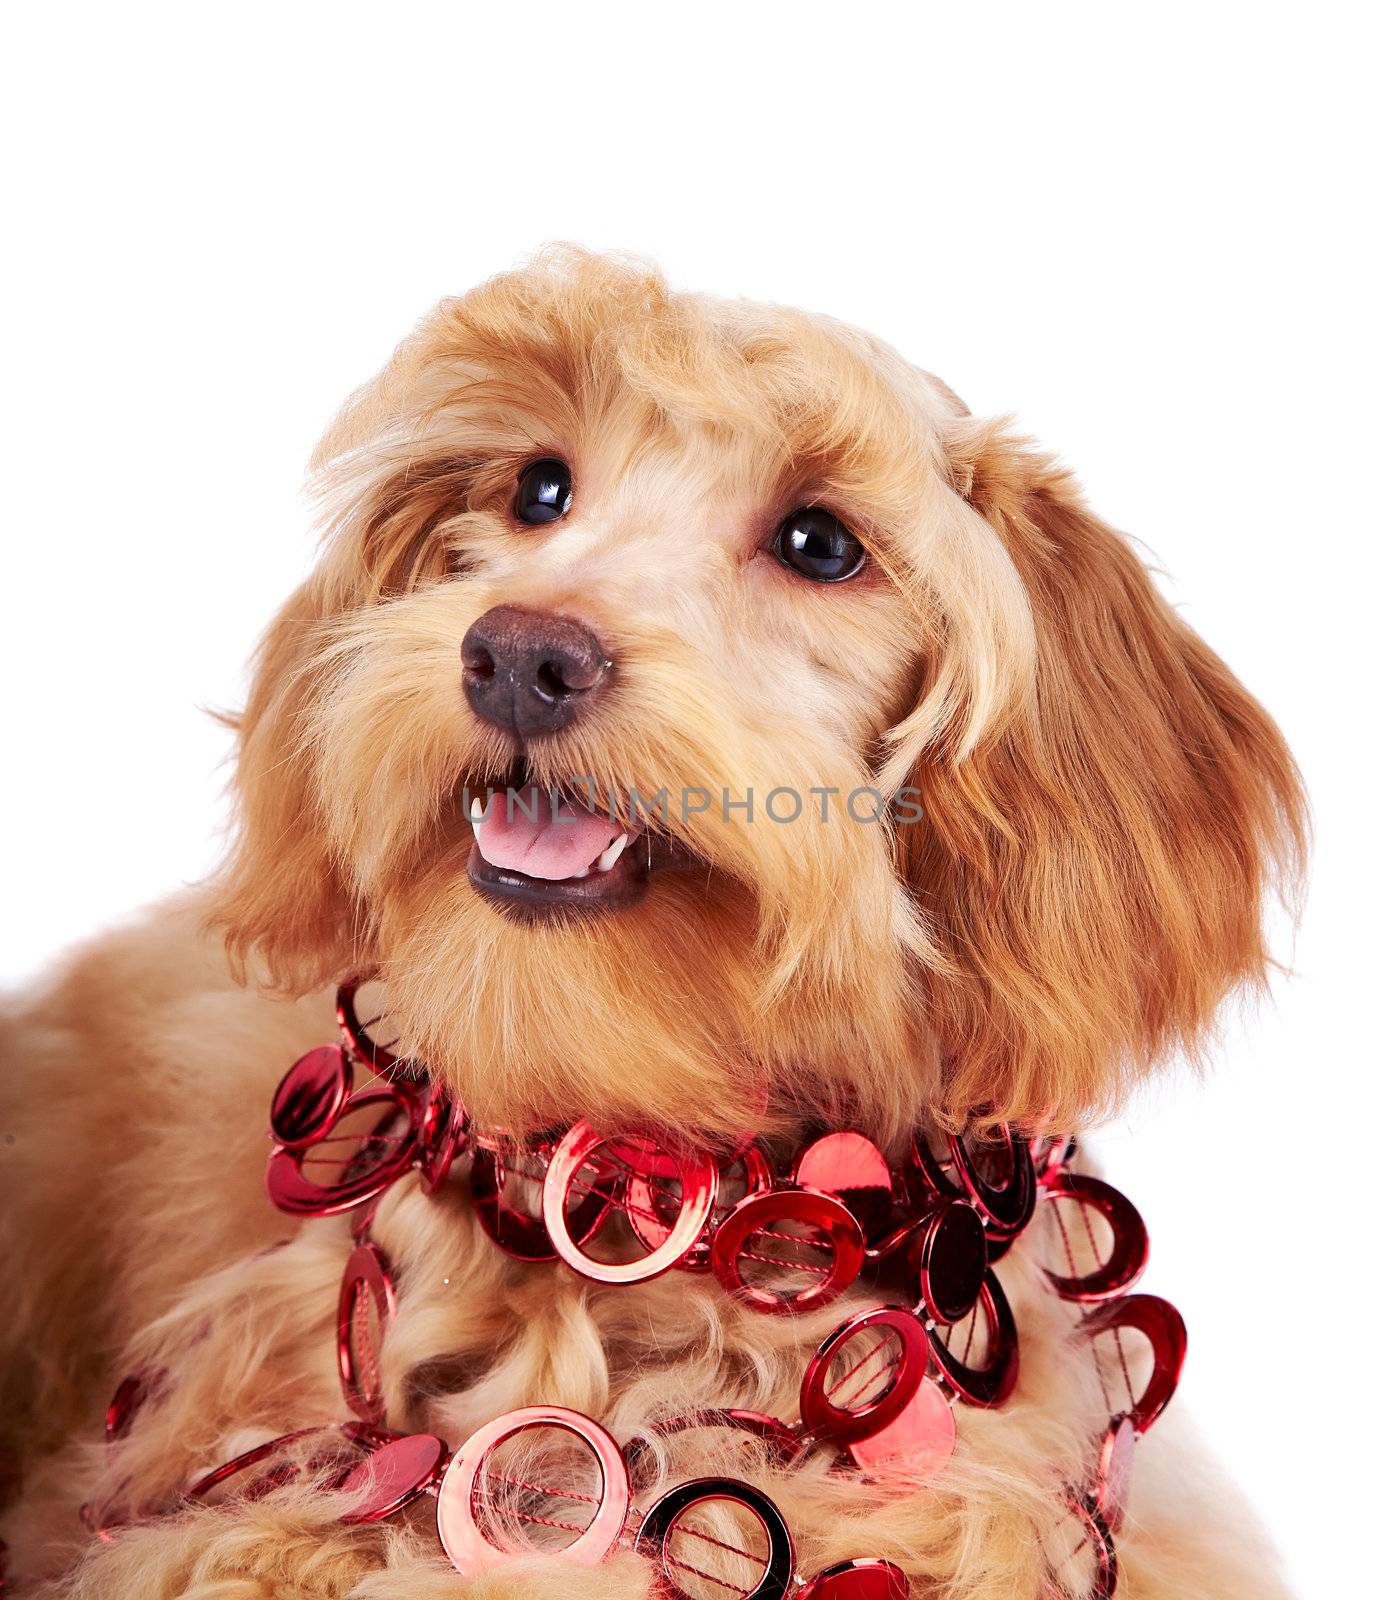 Decorative dog. Puppy of the Petersburg orchid on a white background. Shaggy doggie.  Decorative thoroughbred dog. Red dog.